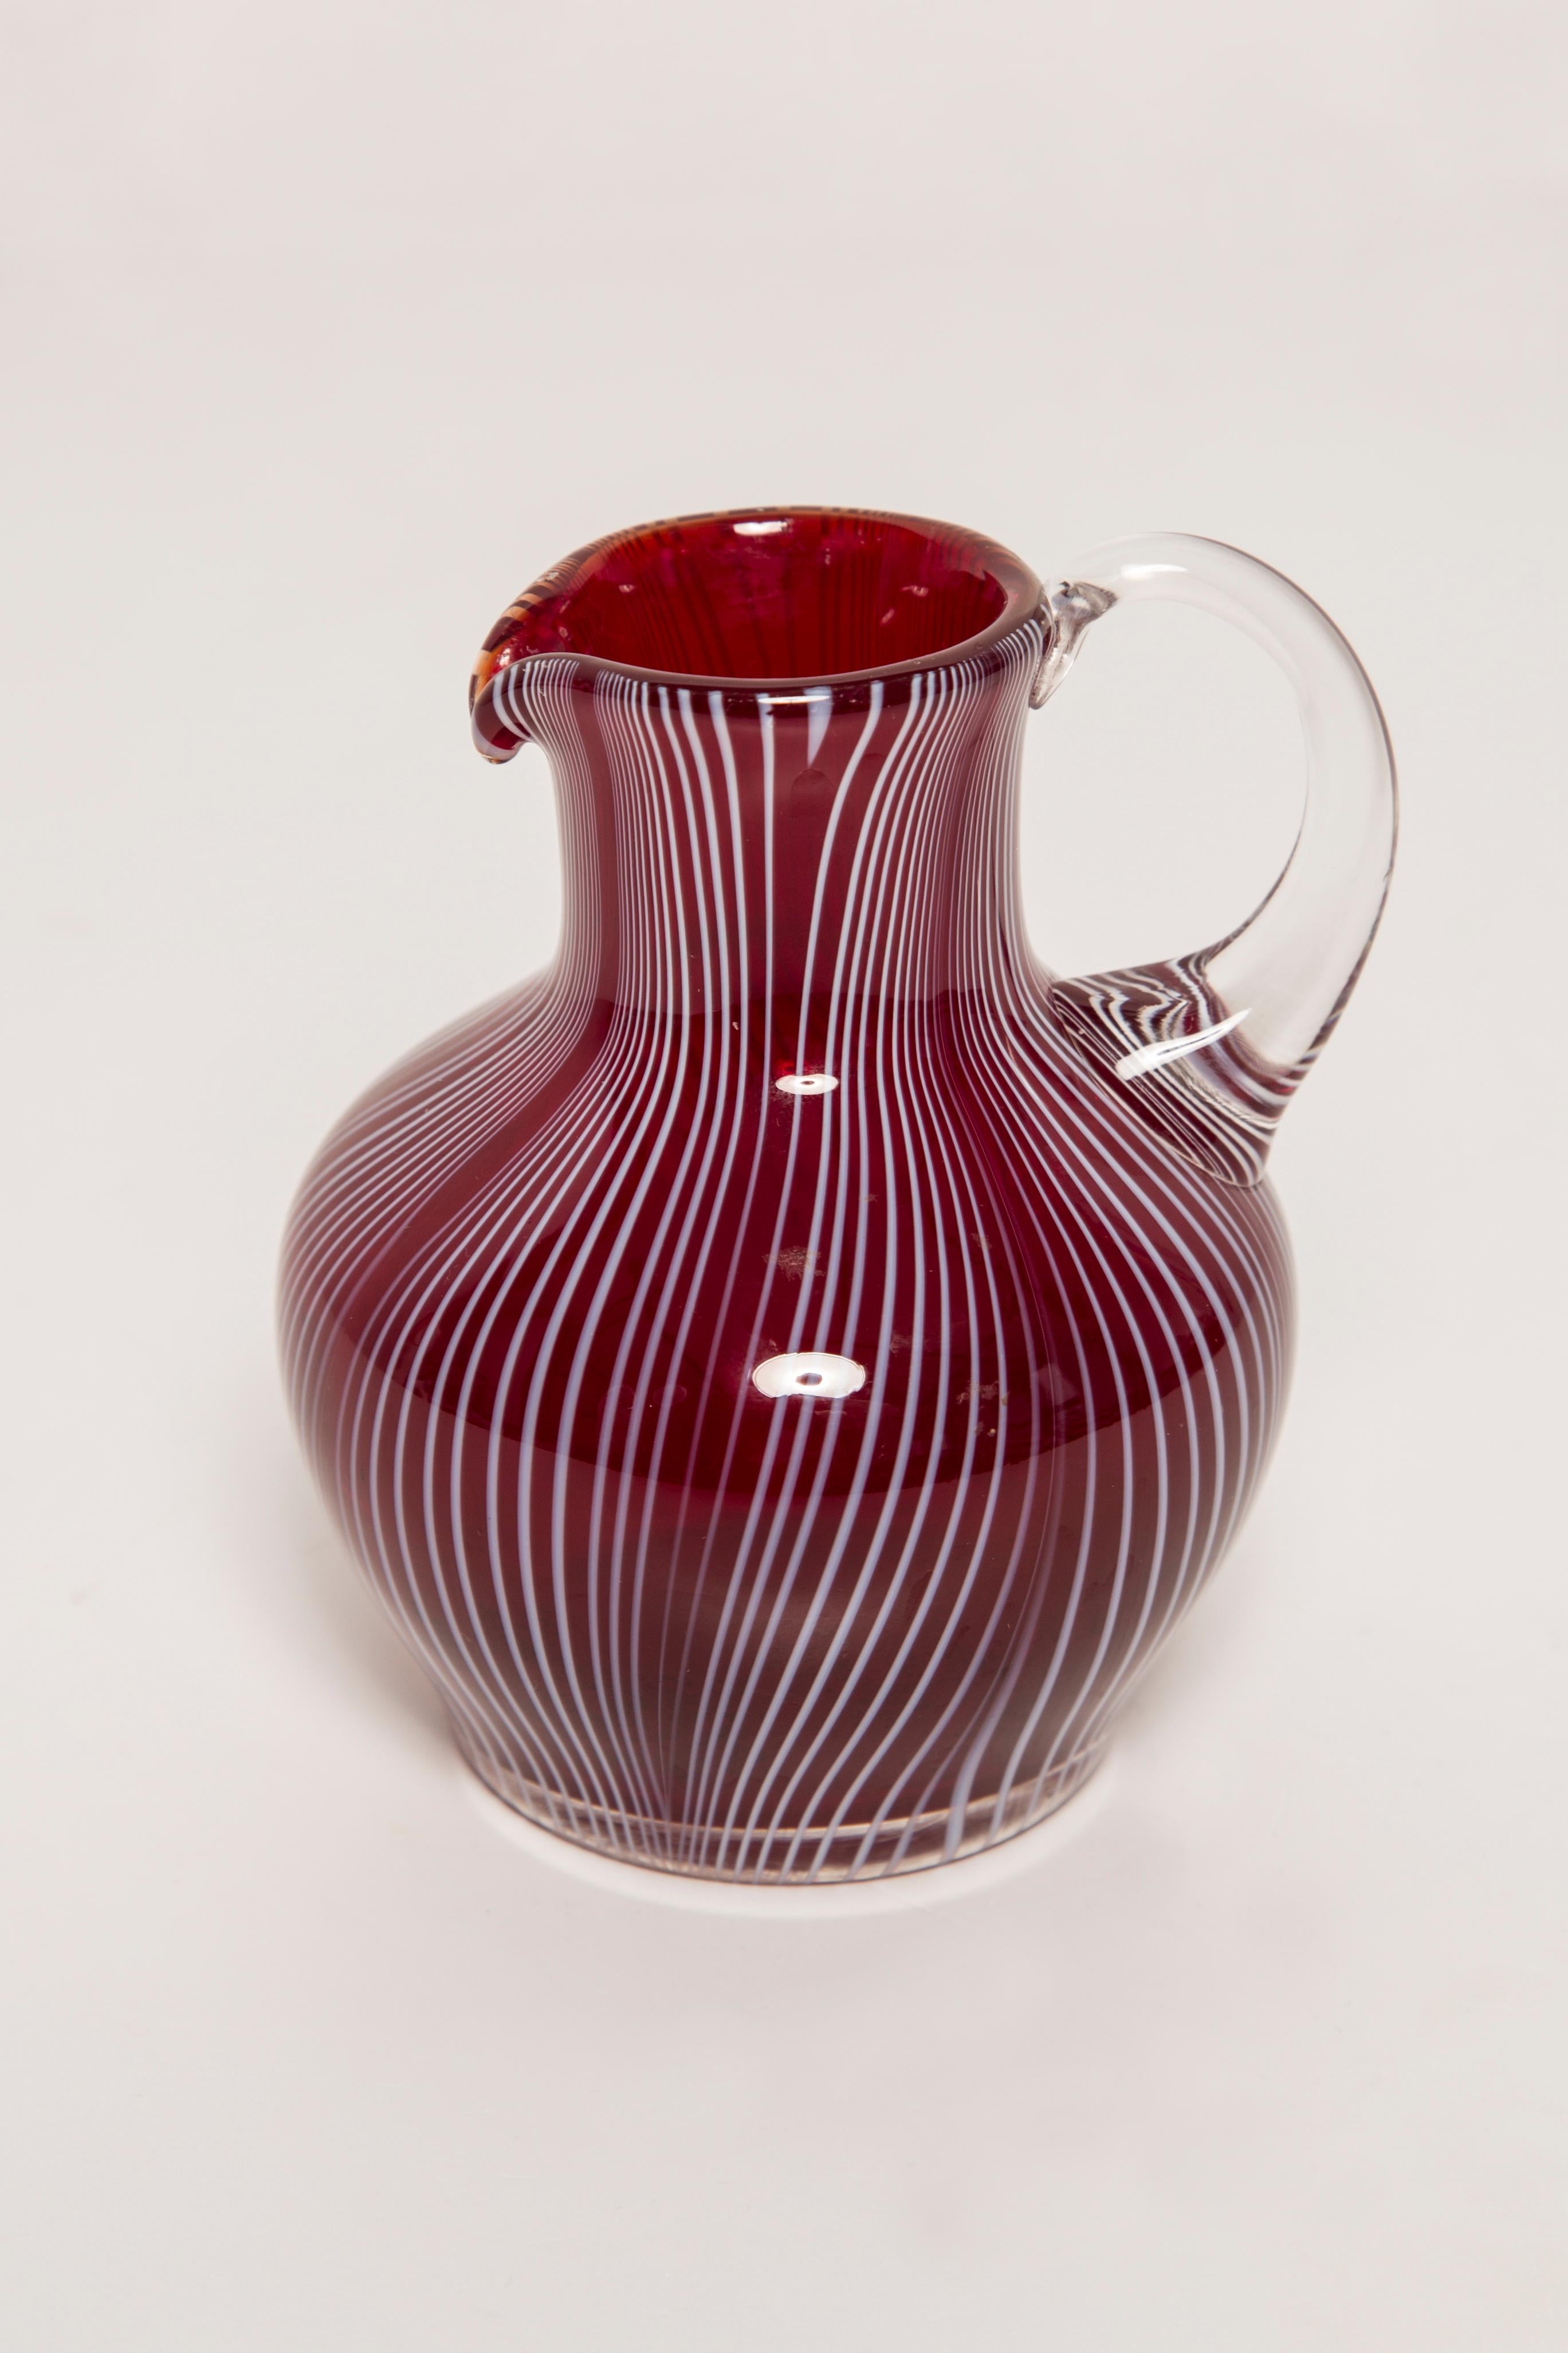 Glass Midcentury Vintage Dark Red Small Vase, Europe, 1960s For Sale